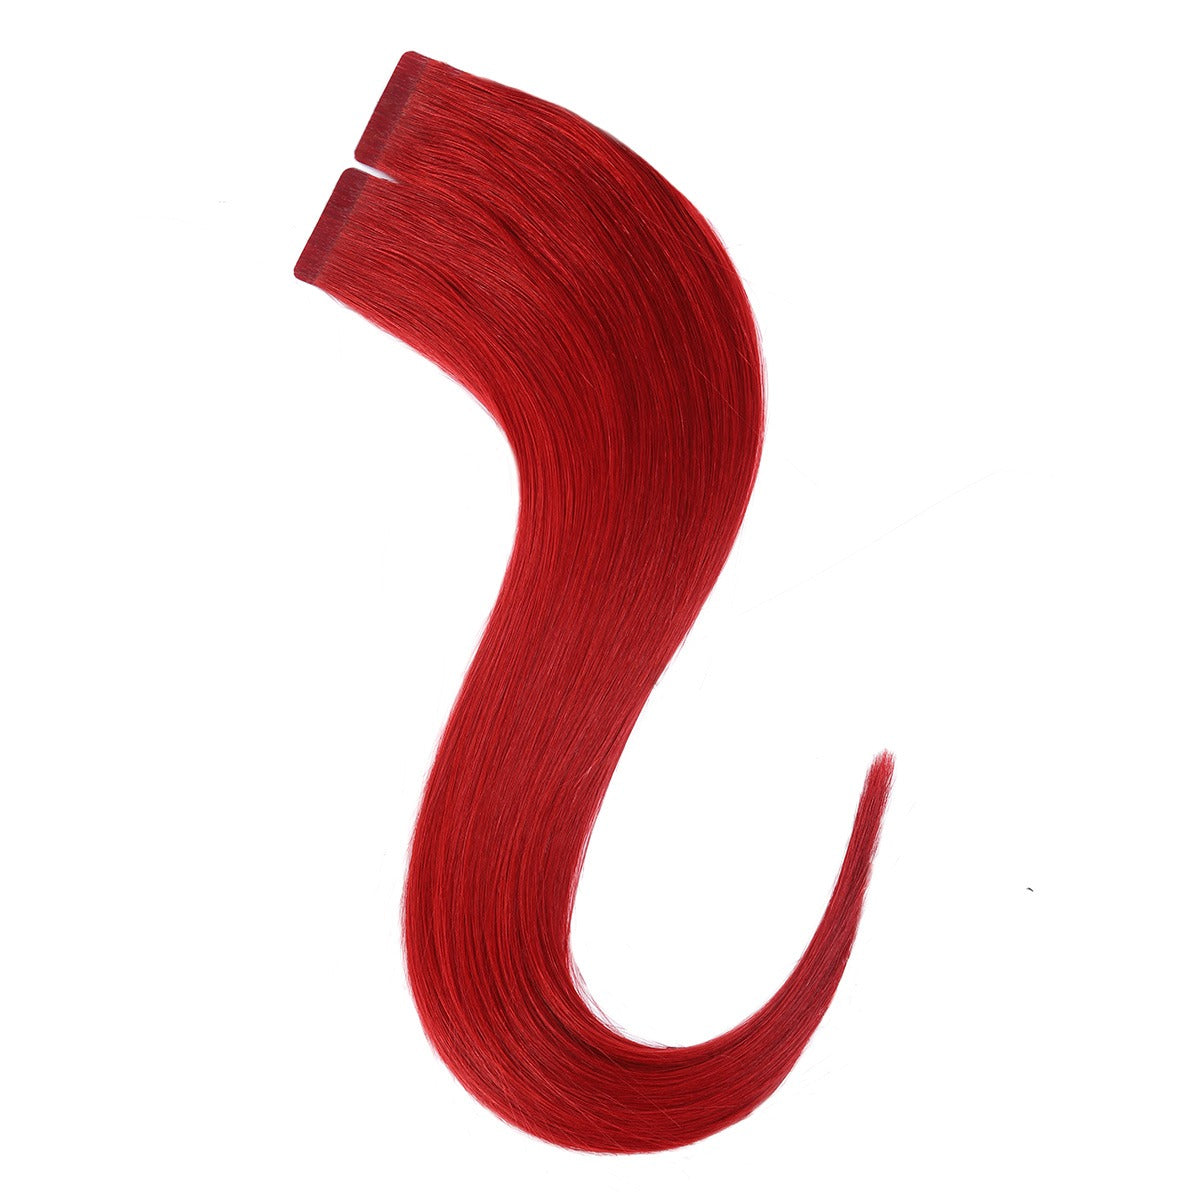 STARDUST Tape-In Vibrant Red Hair Extensions